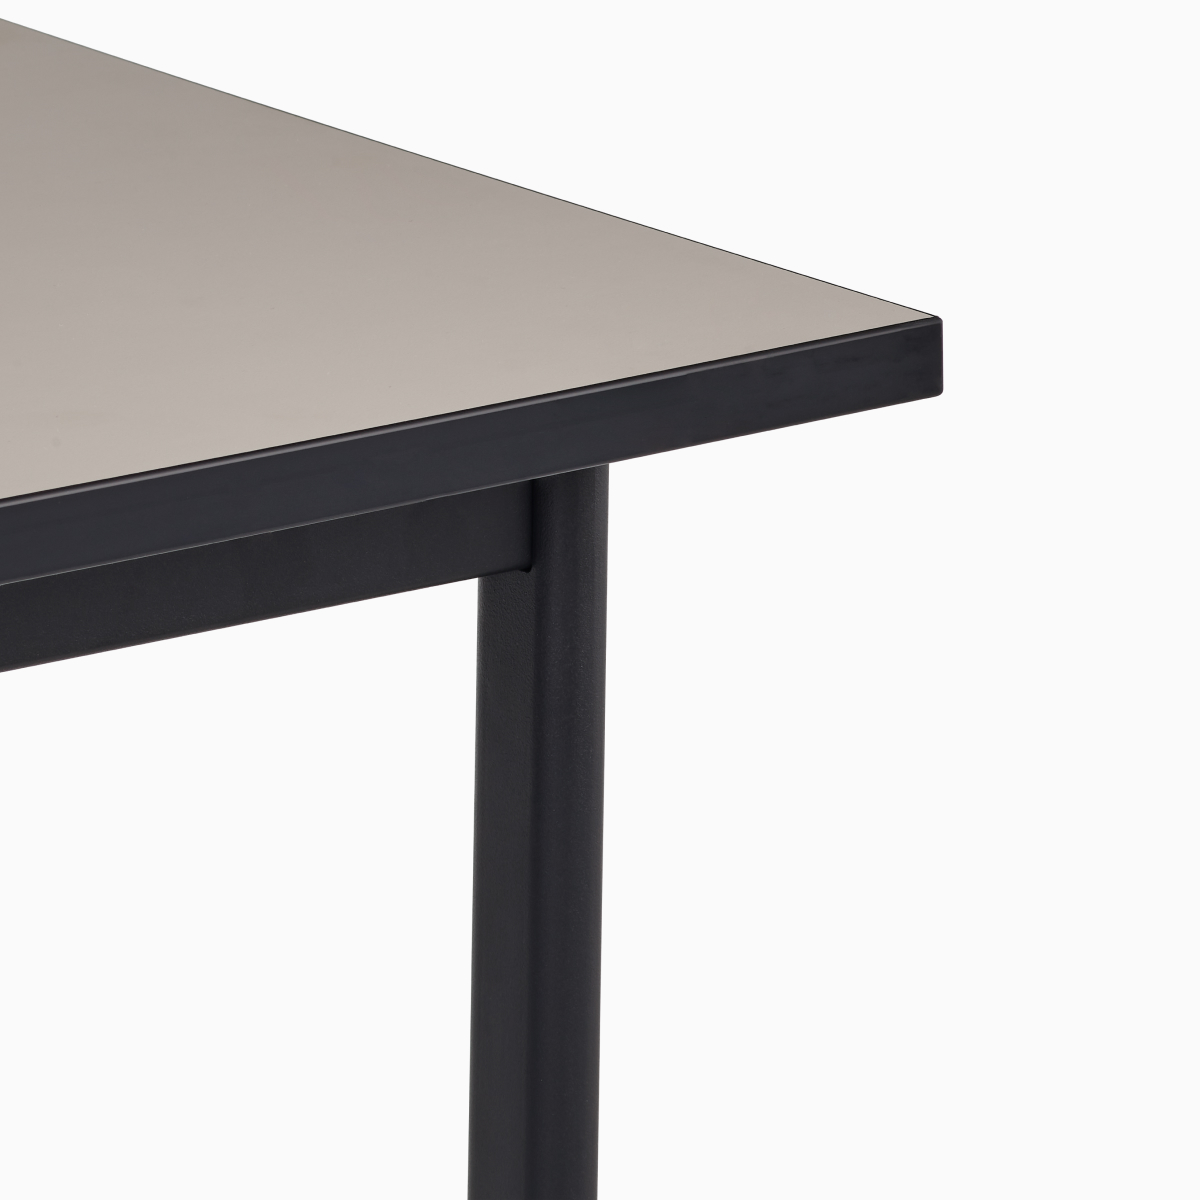 Detail view of the sandstone laminate top on a black Mode desk.